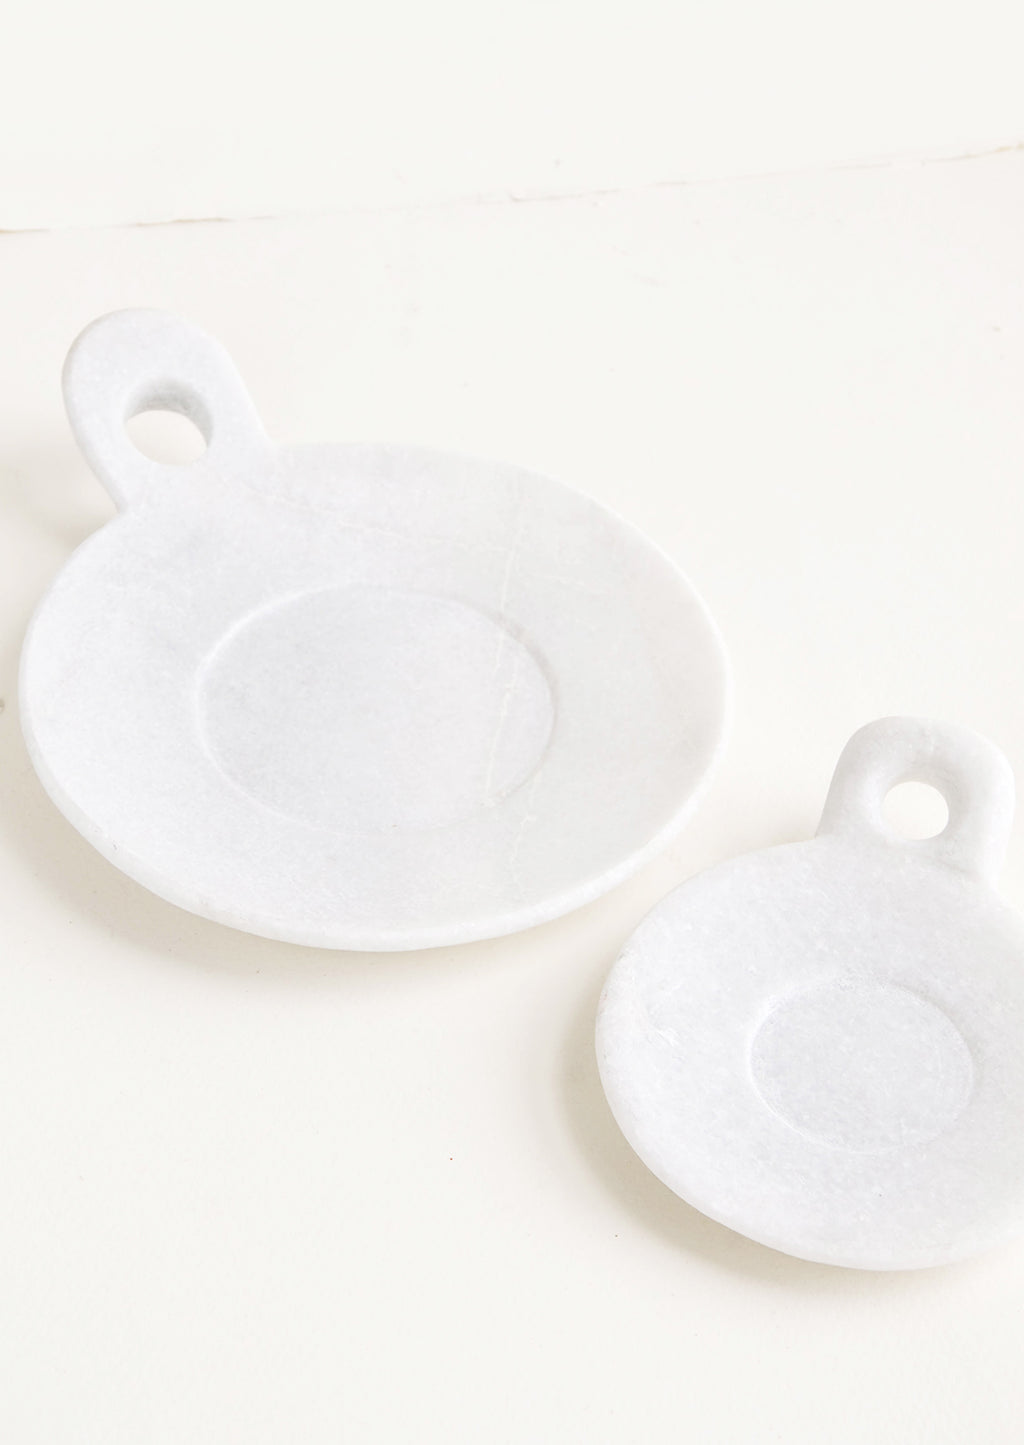 2: Round marble dishes with circular cutout side handle and circular inset at center